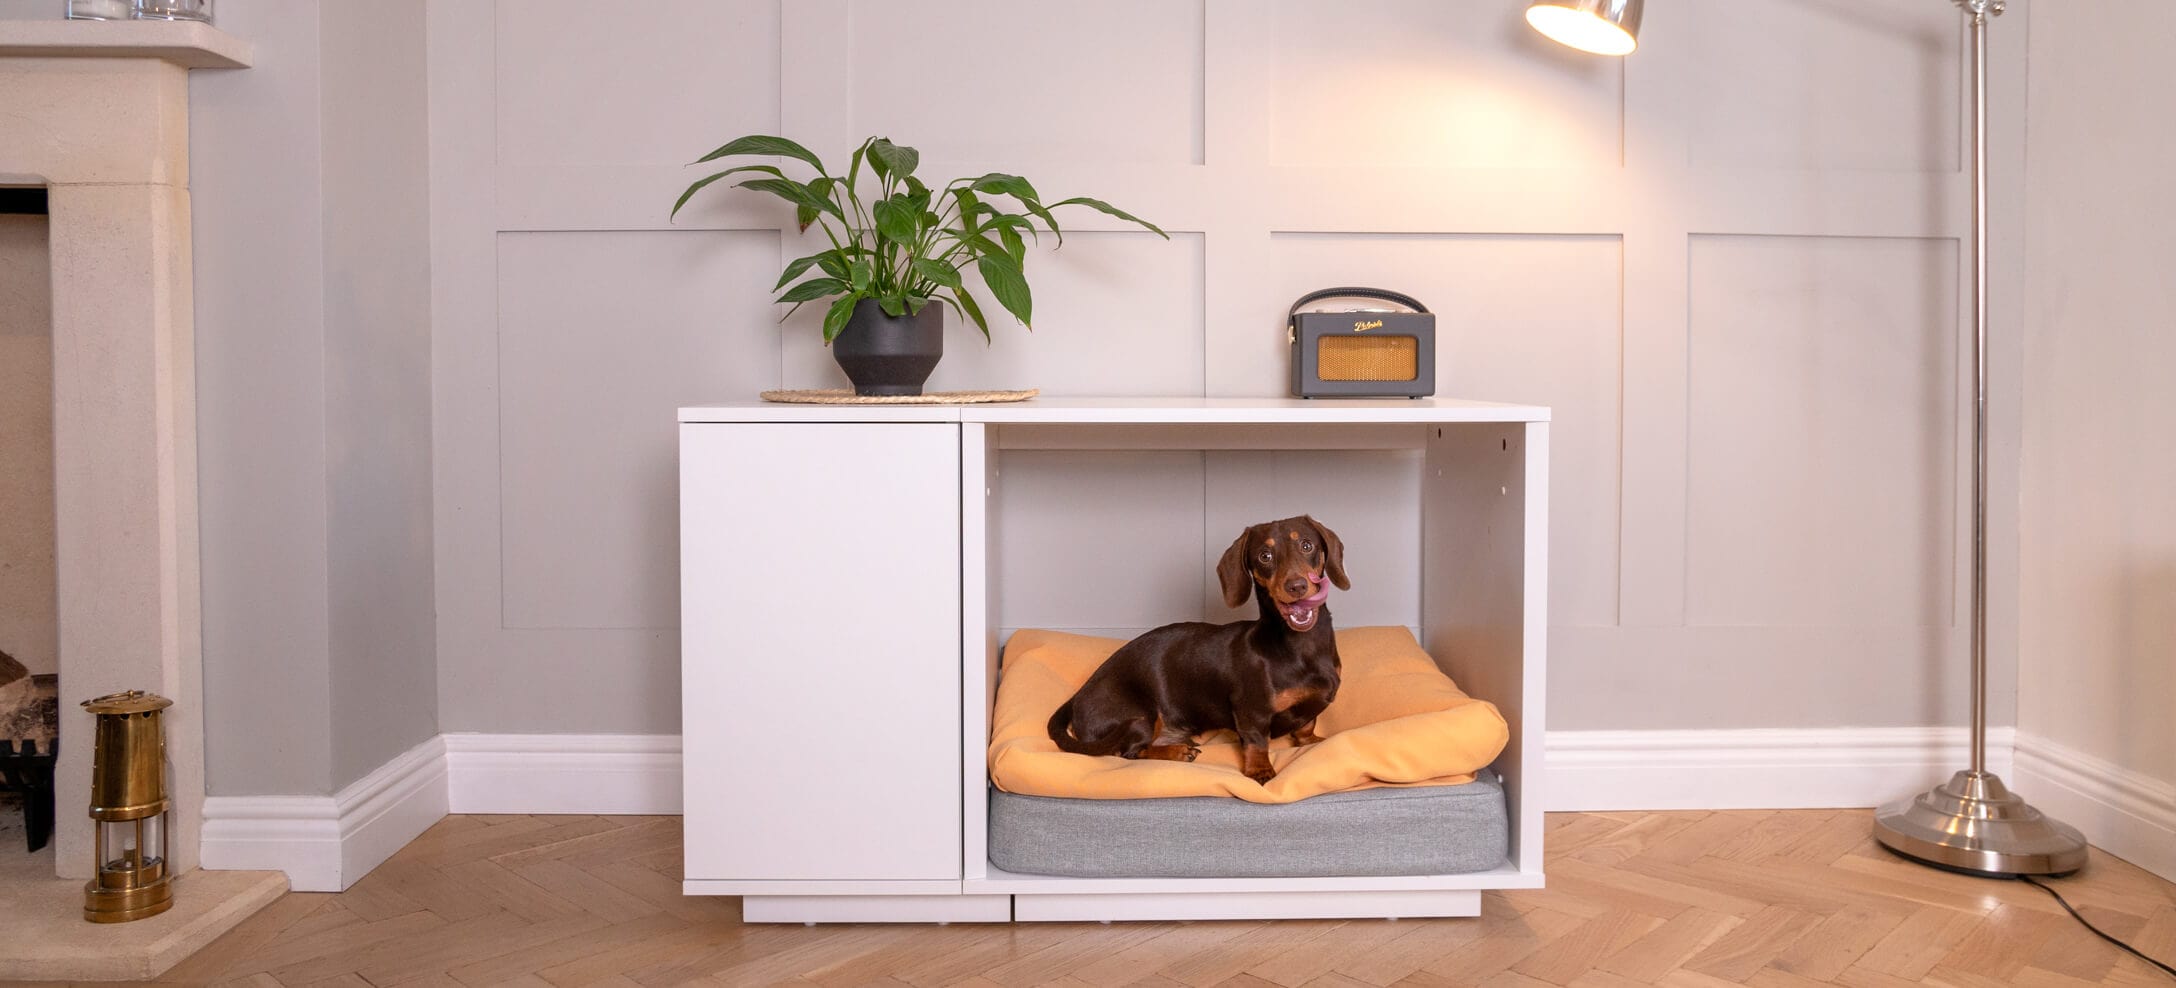 Dachshund in their Omlet Fido Nook dog crate